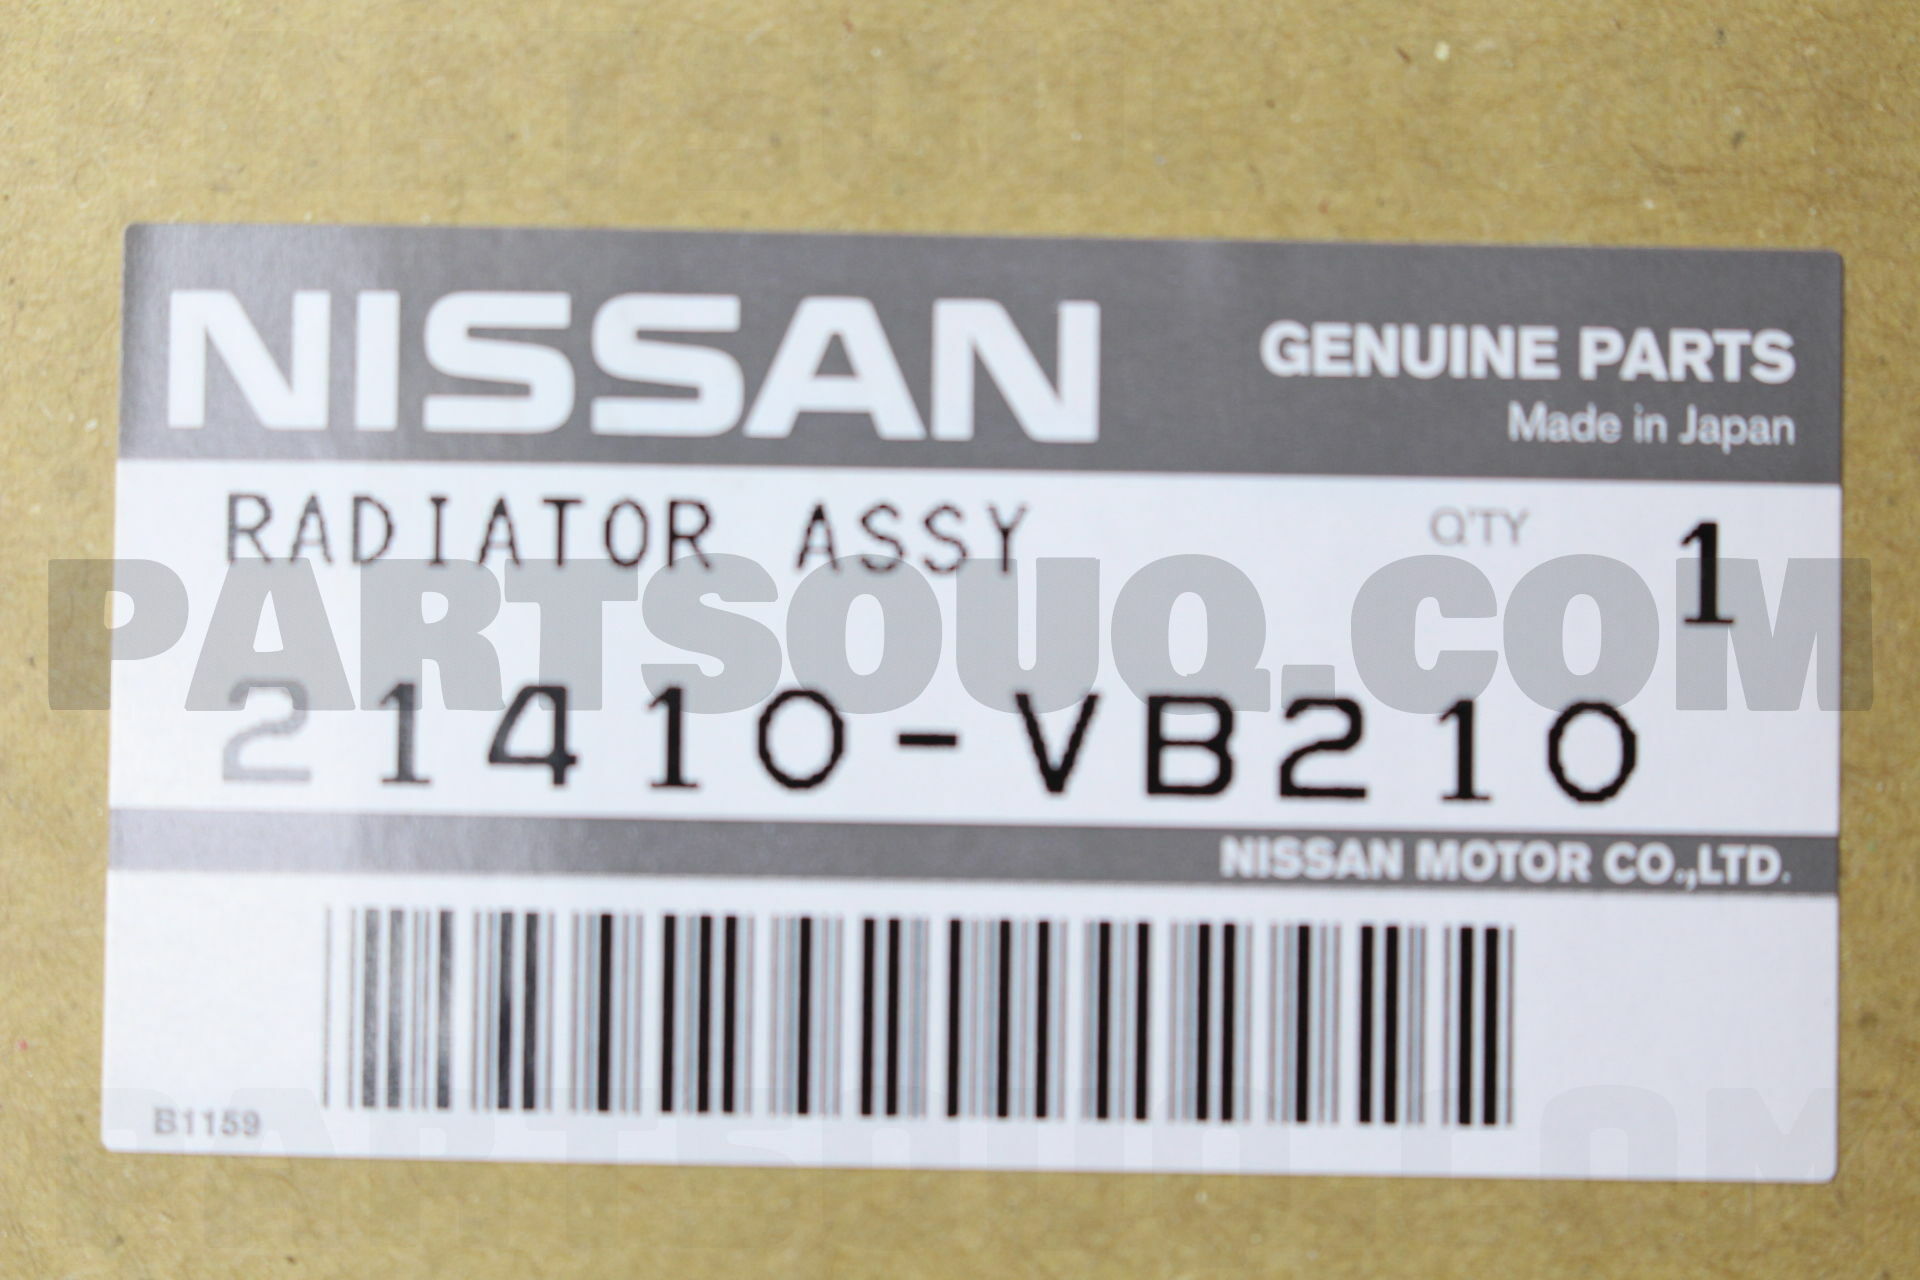 214101Y600 Nissan RADIATOR ASSY Price: 375.76$, Weight: 7 